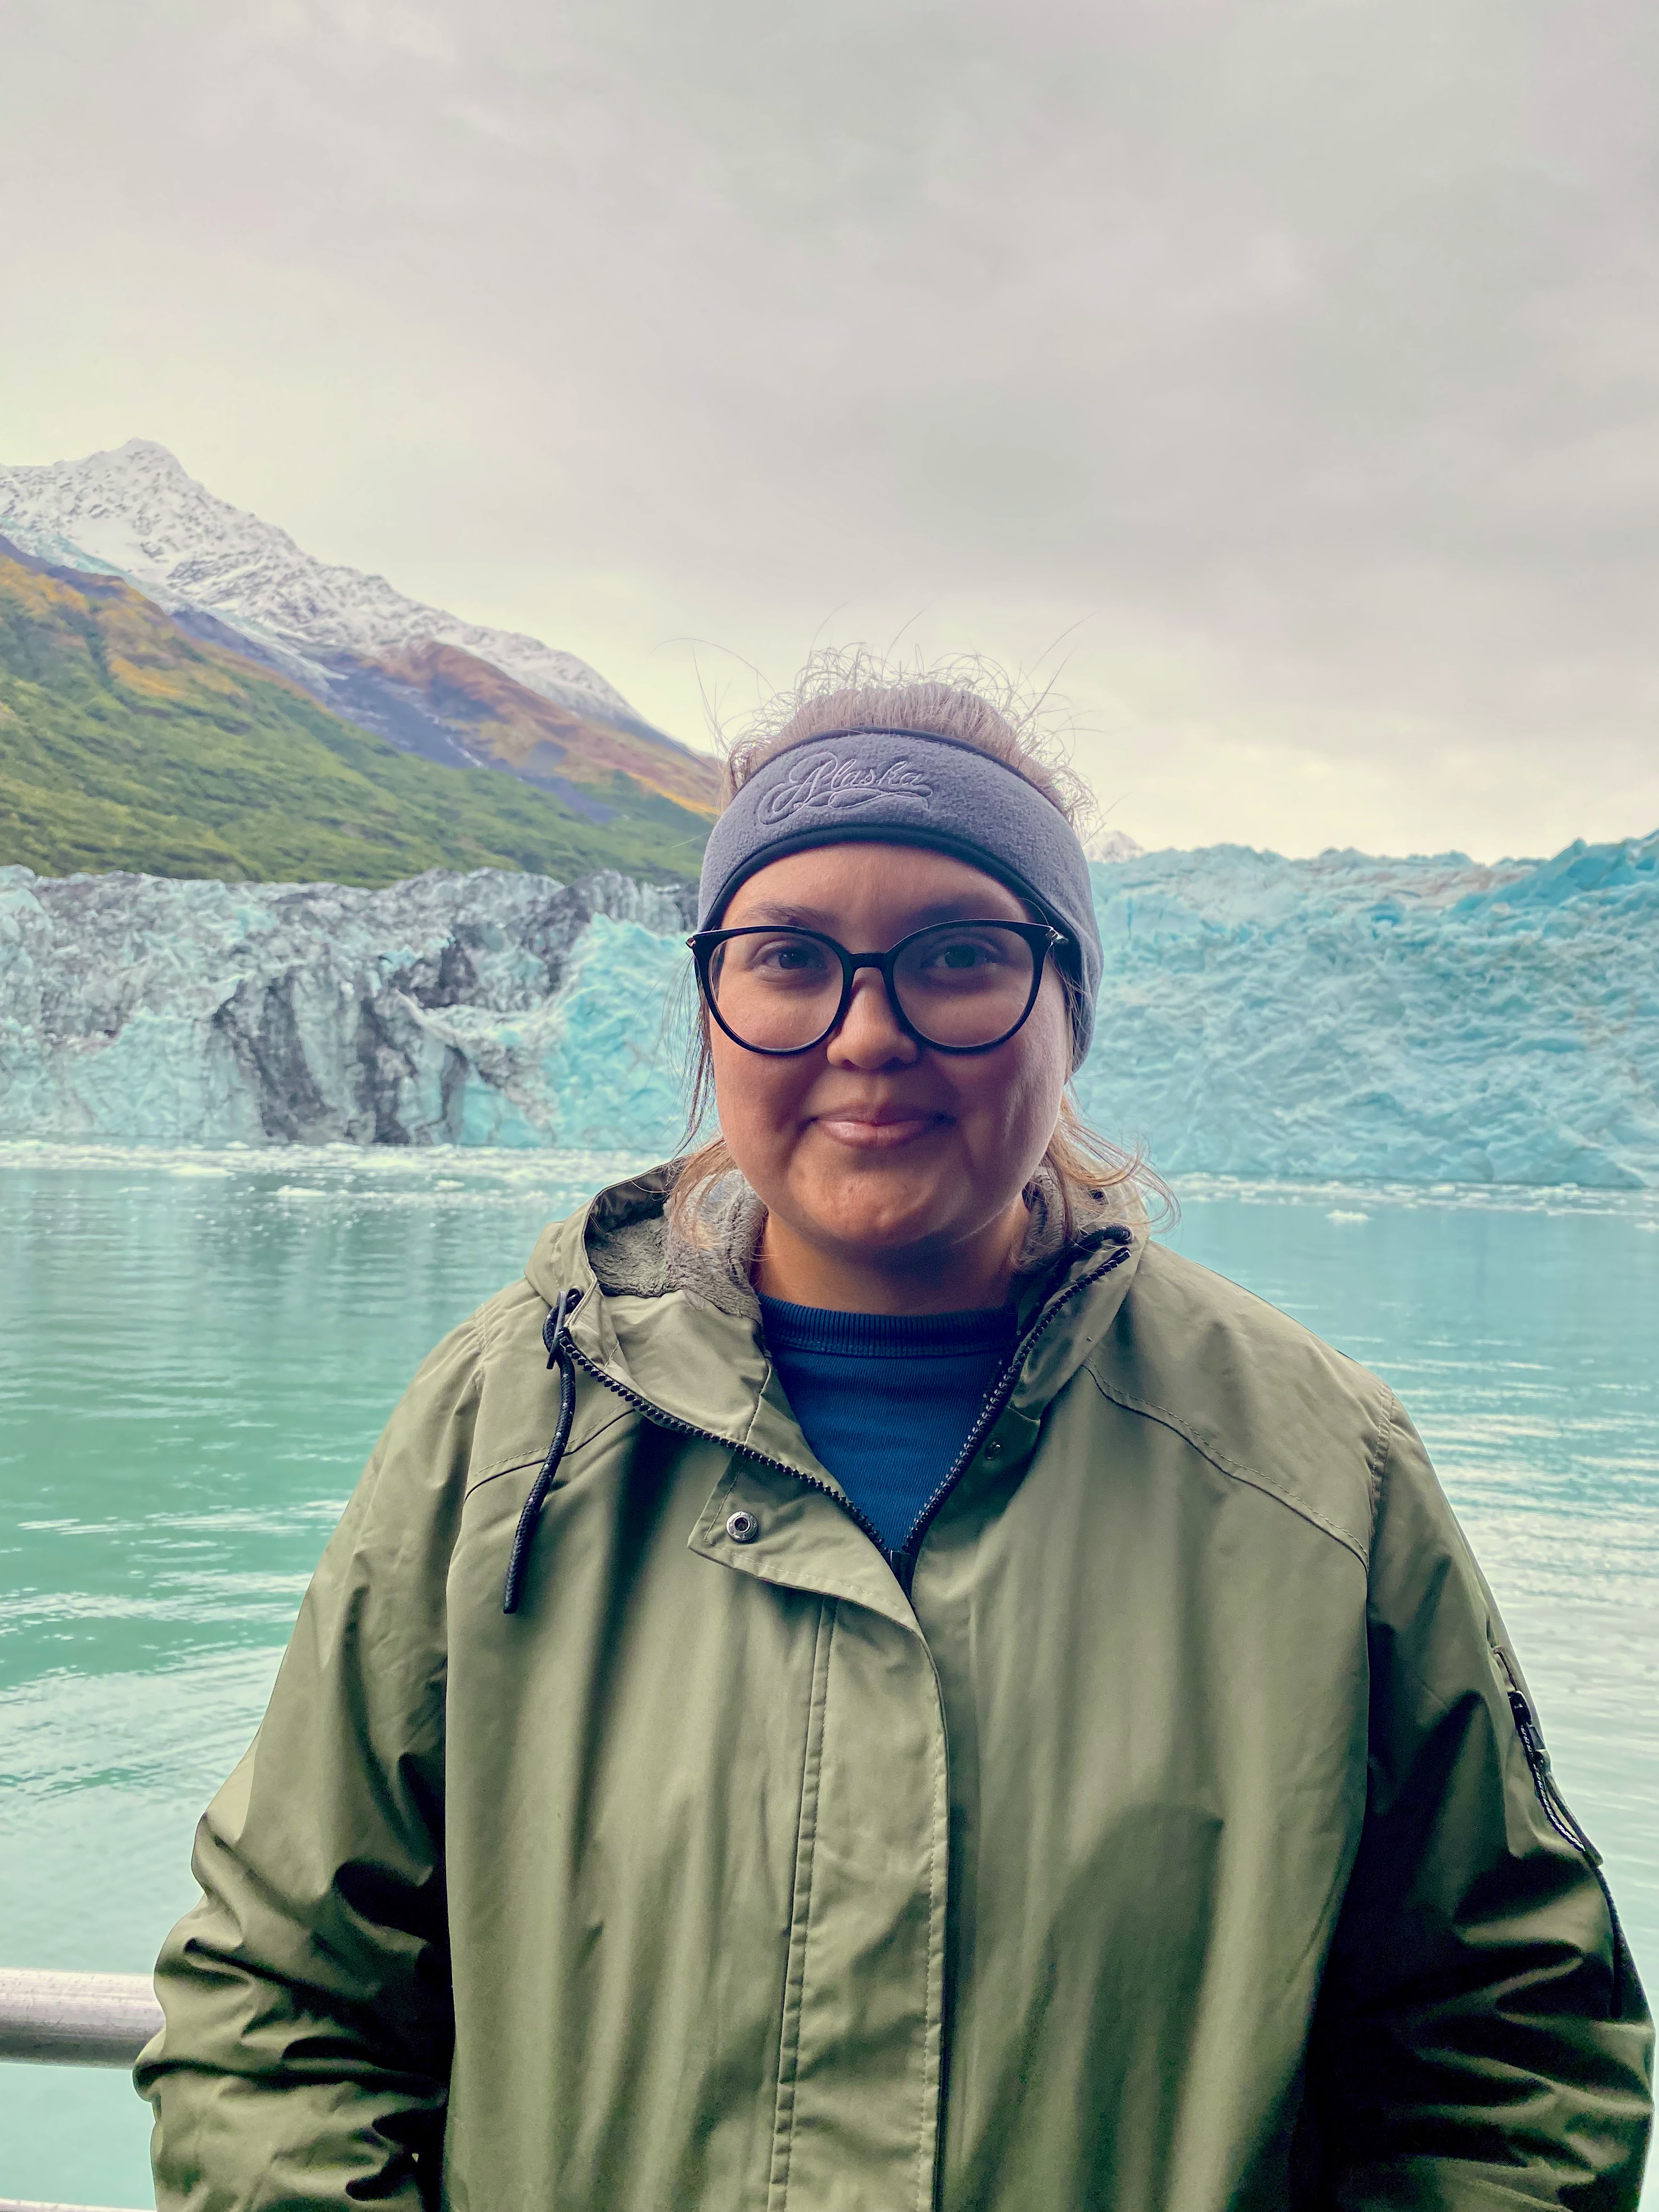 Photo of Anya Carillo, an Indigenous woman. She is standing in front of a body of water and mountains, wearing a green coat, glasses, and headband.